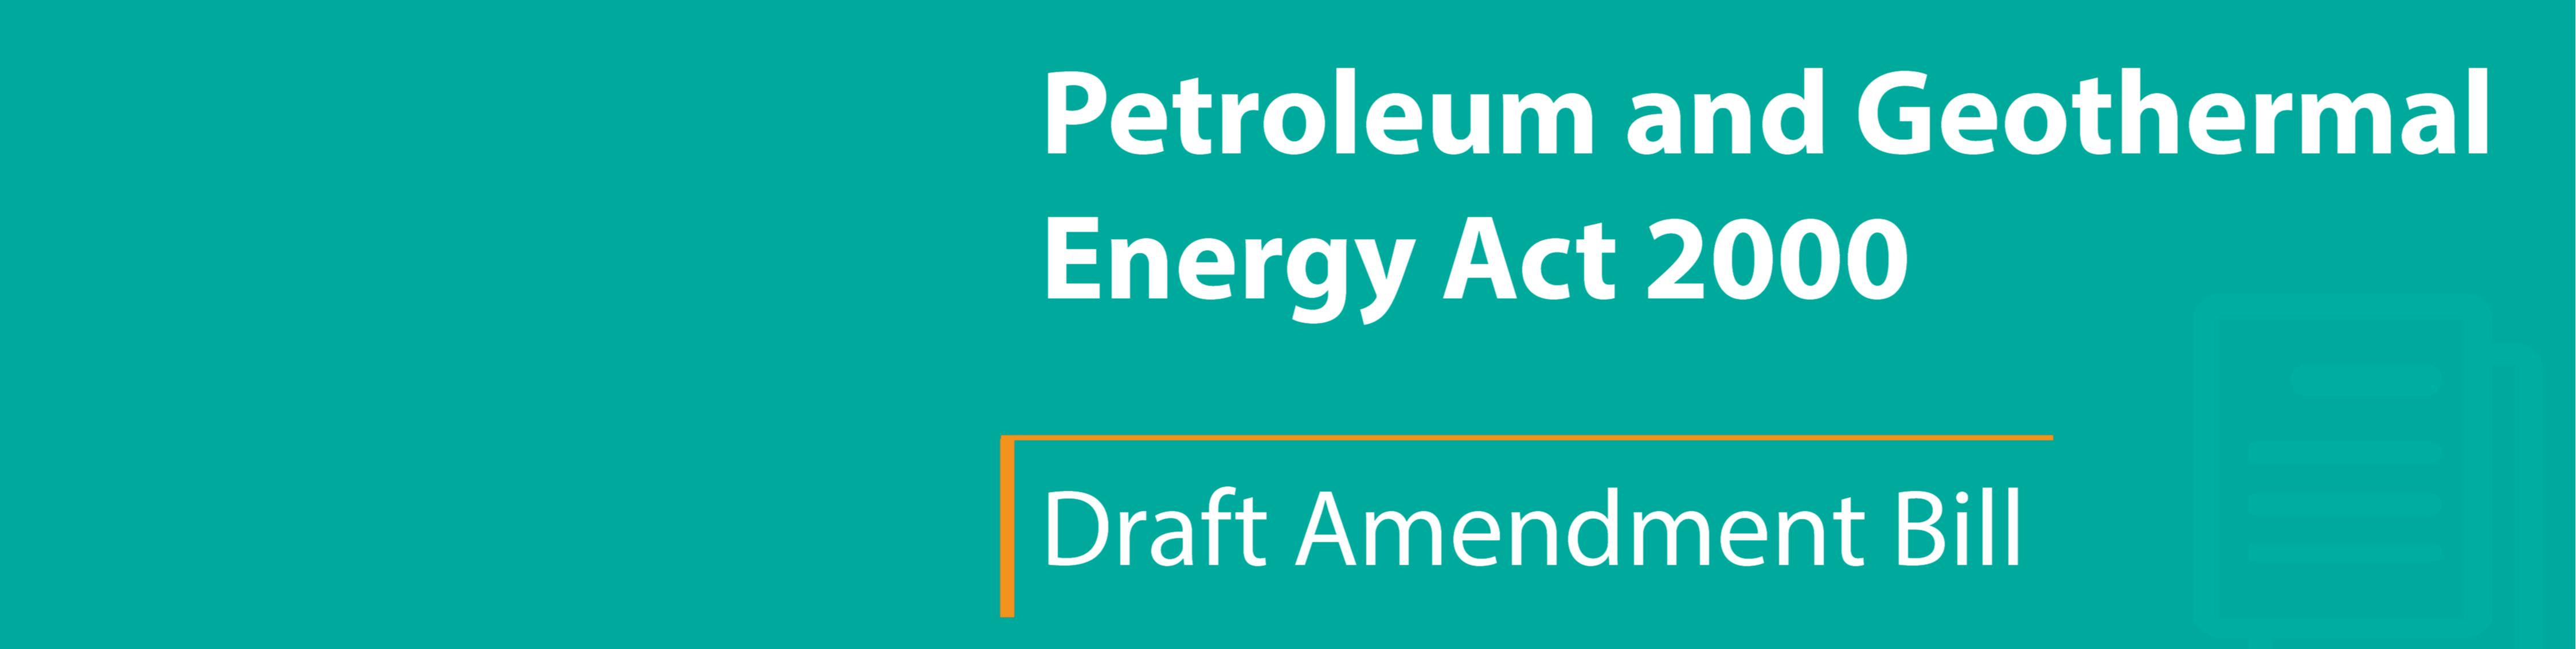 Amendments to the Petroleum and Geothermal Energy Act YourSAy